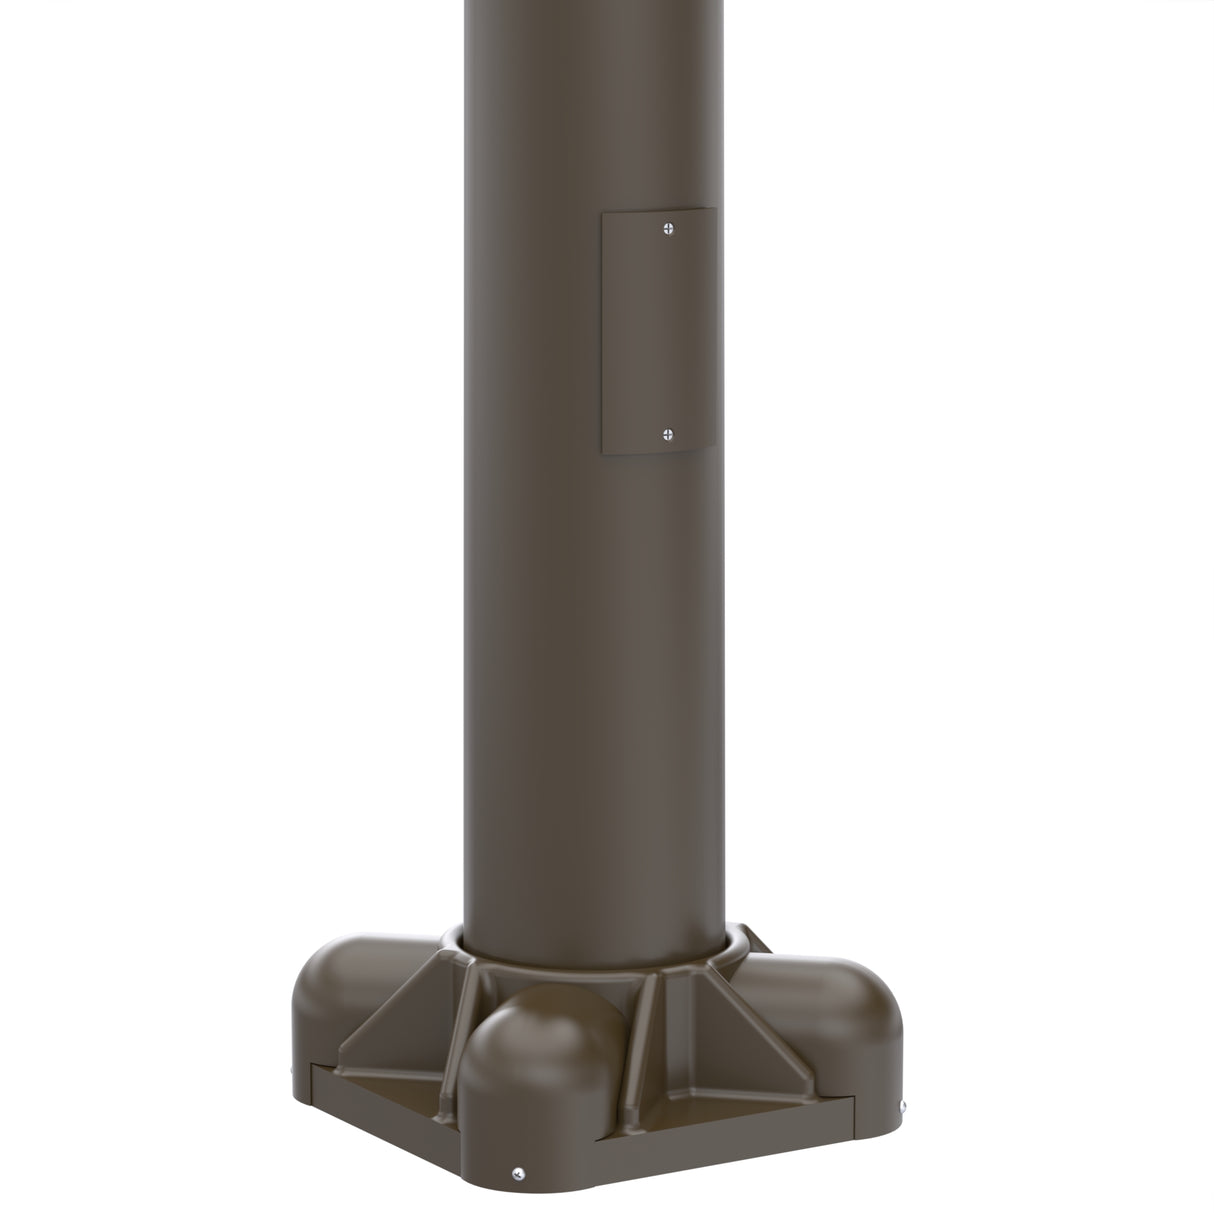 28' Tall x 10" Base OD x 6.0" Top OD x 0.250" Thick, Round Tapered Aluminum, Anchor Base Light Pole